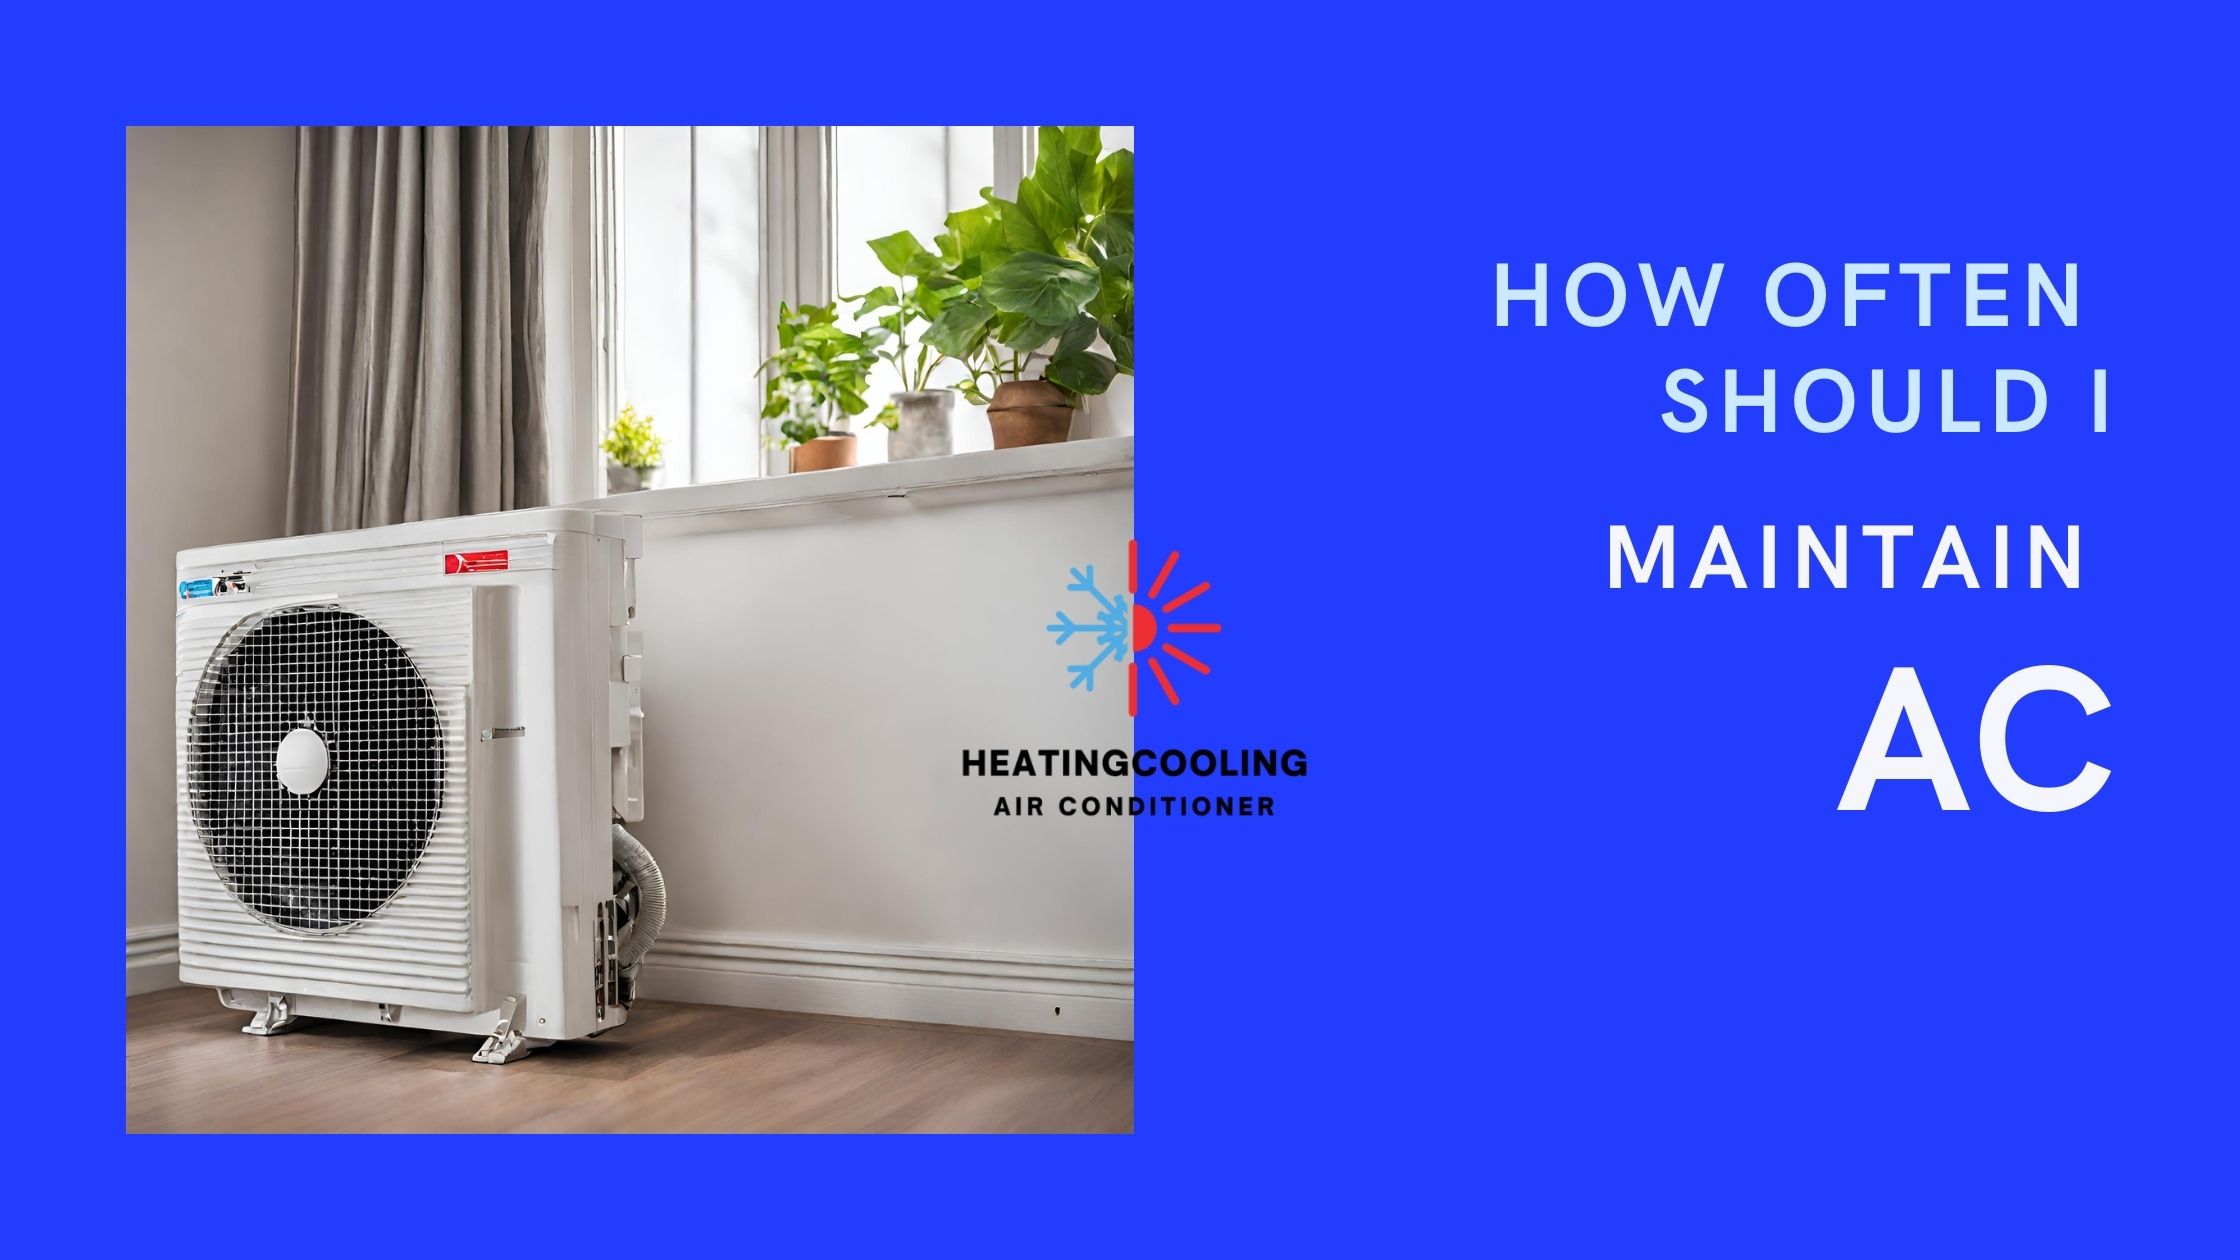 How Often Should I Service Or Maintain My Air Conditioner?